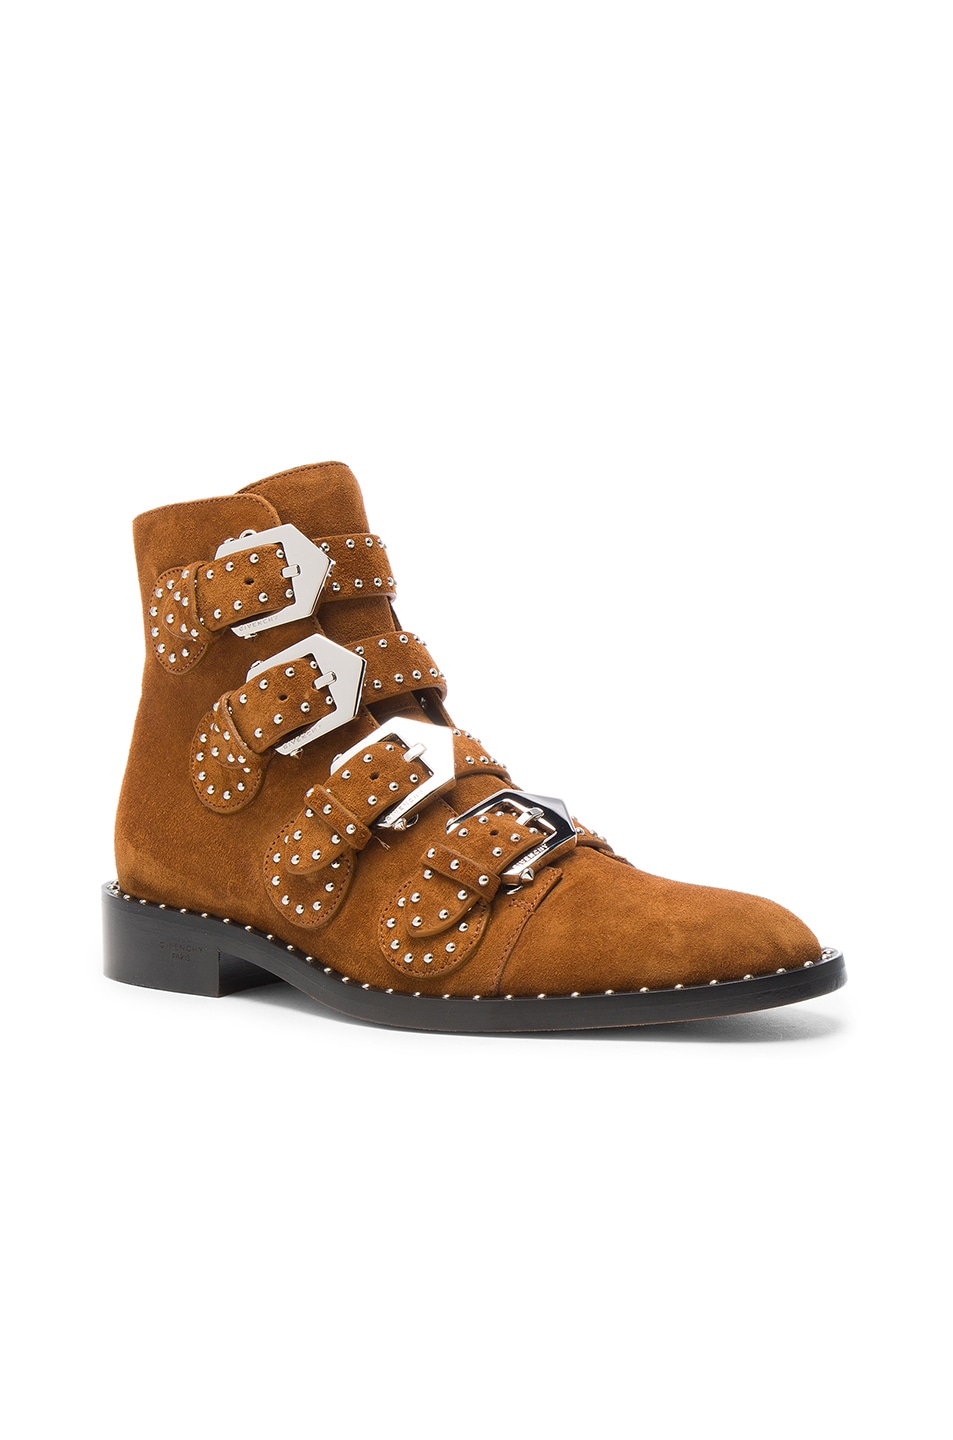 10 Stores In Stock: GIVENCHY Elegant Studded Suede Ankle Boot, Caramel ...